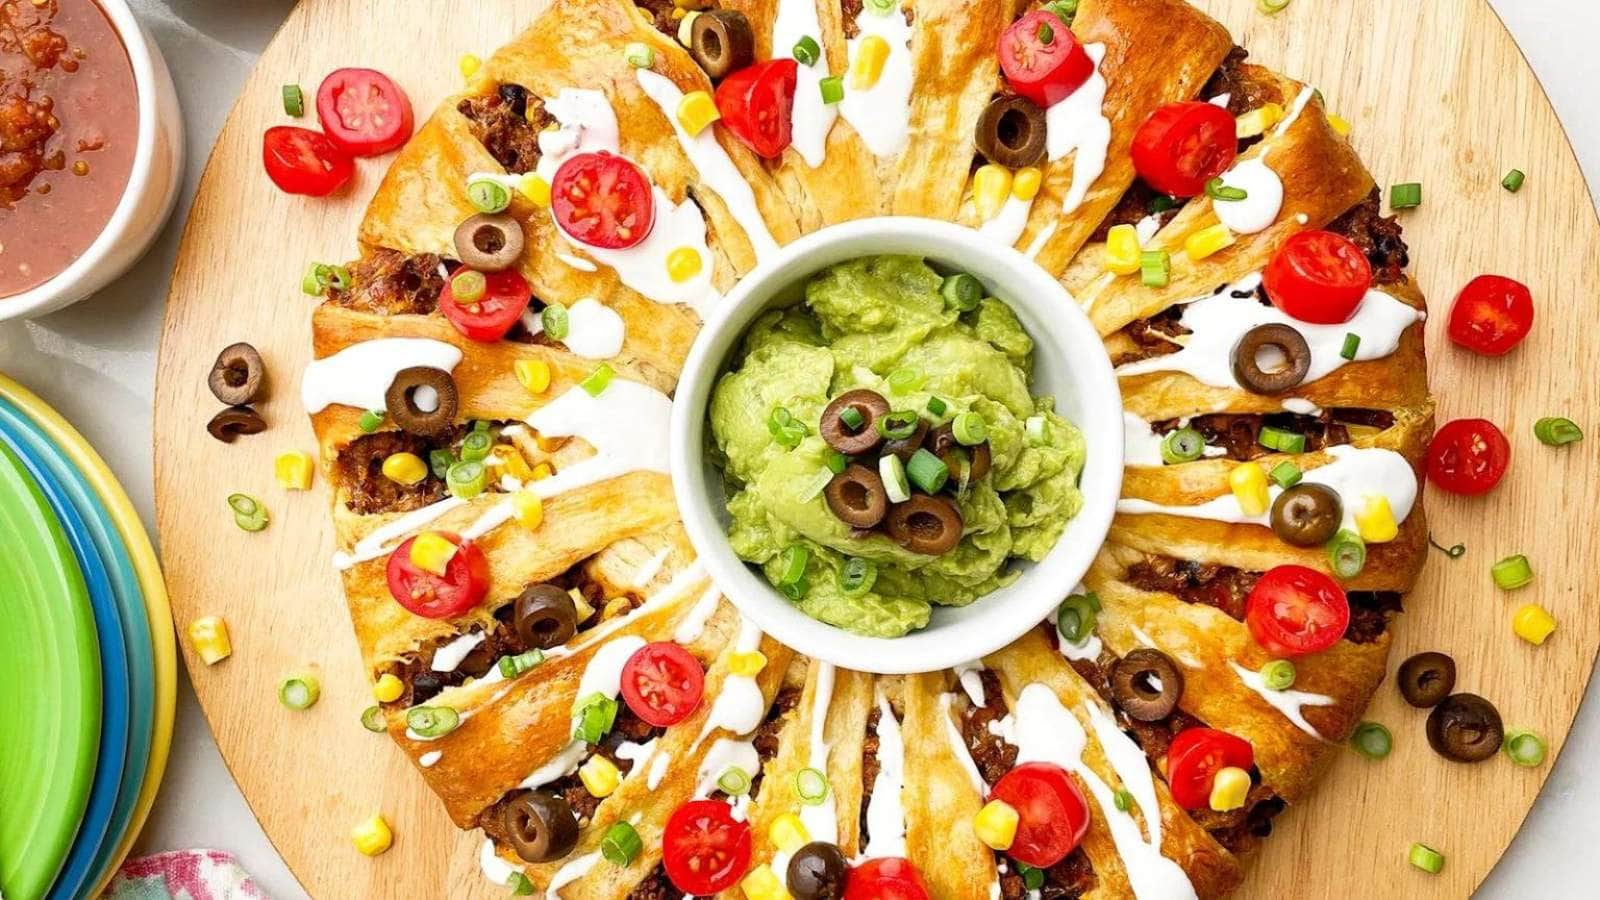 Taco Ring recipe by Mid Western Home Life.